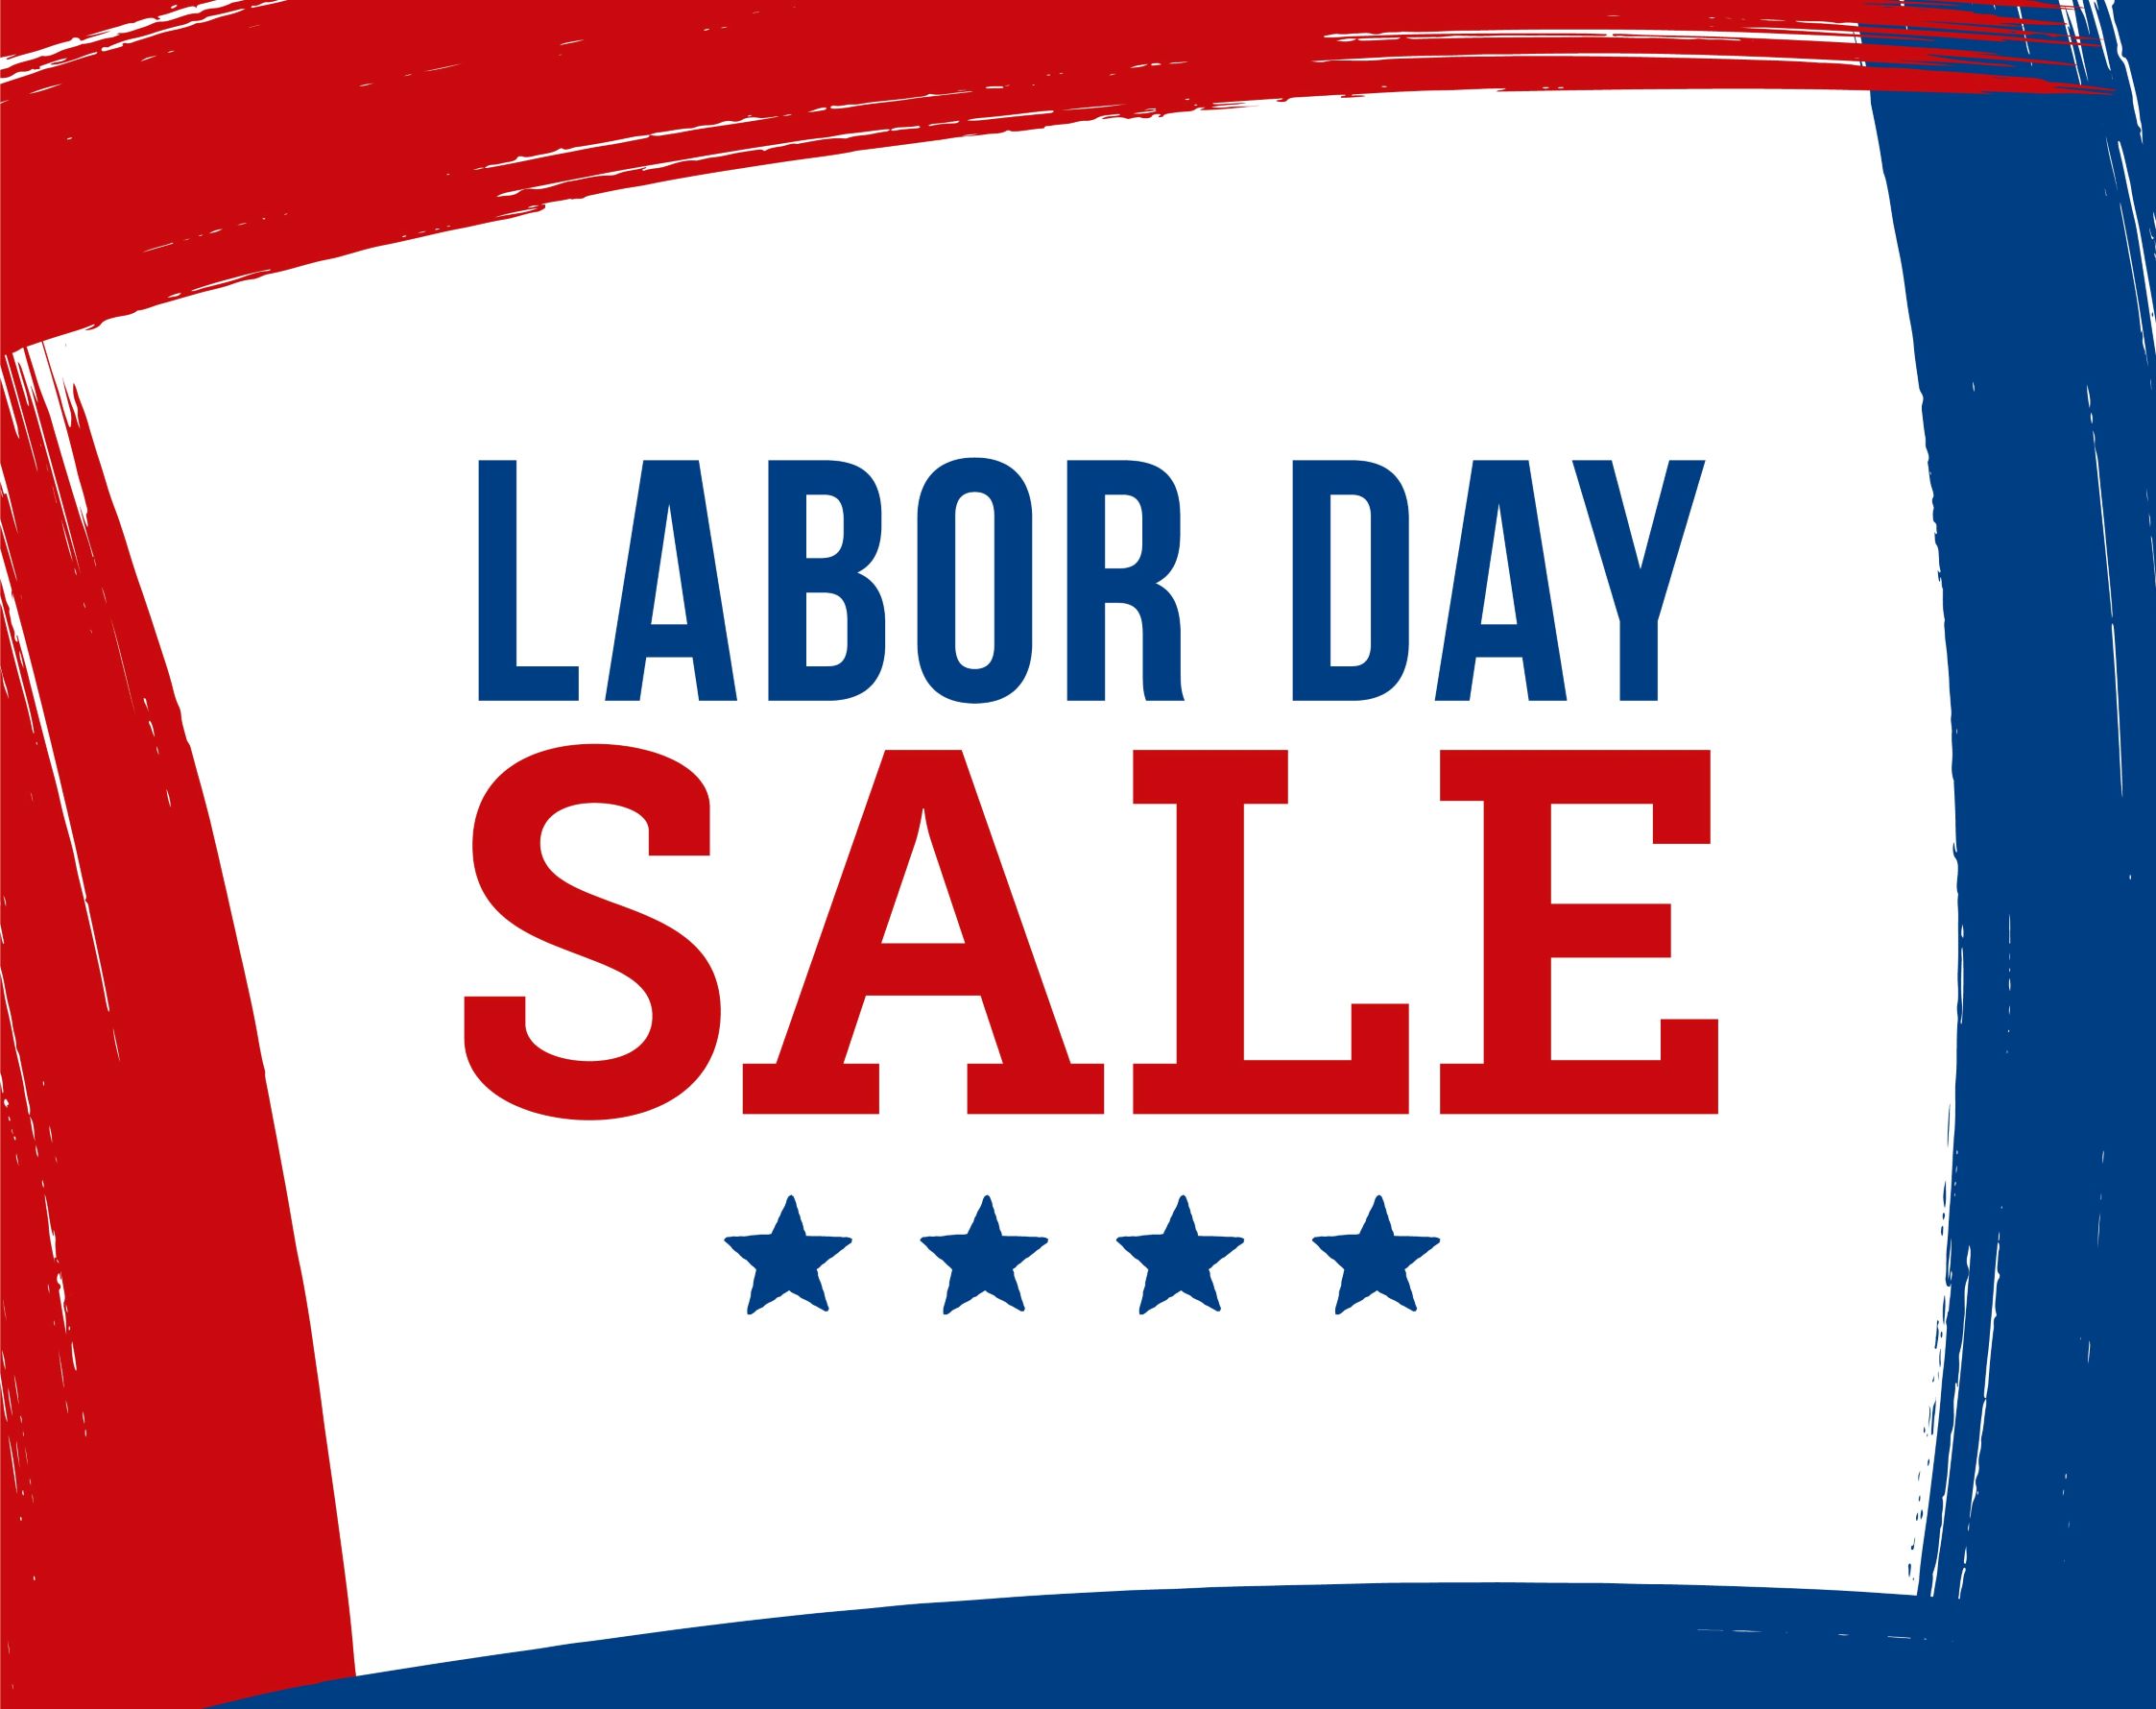 Best Labor Day sales you can still get Deals on laptops, tablets